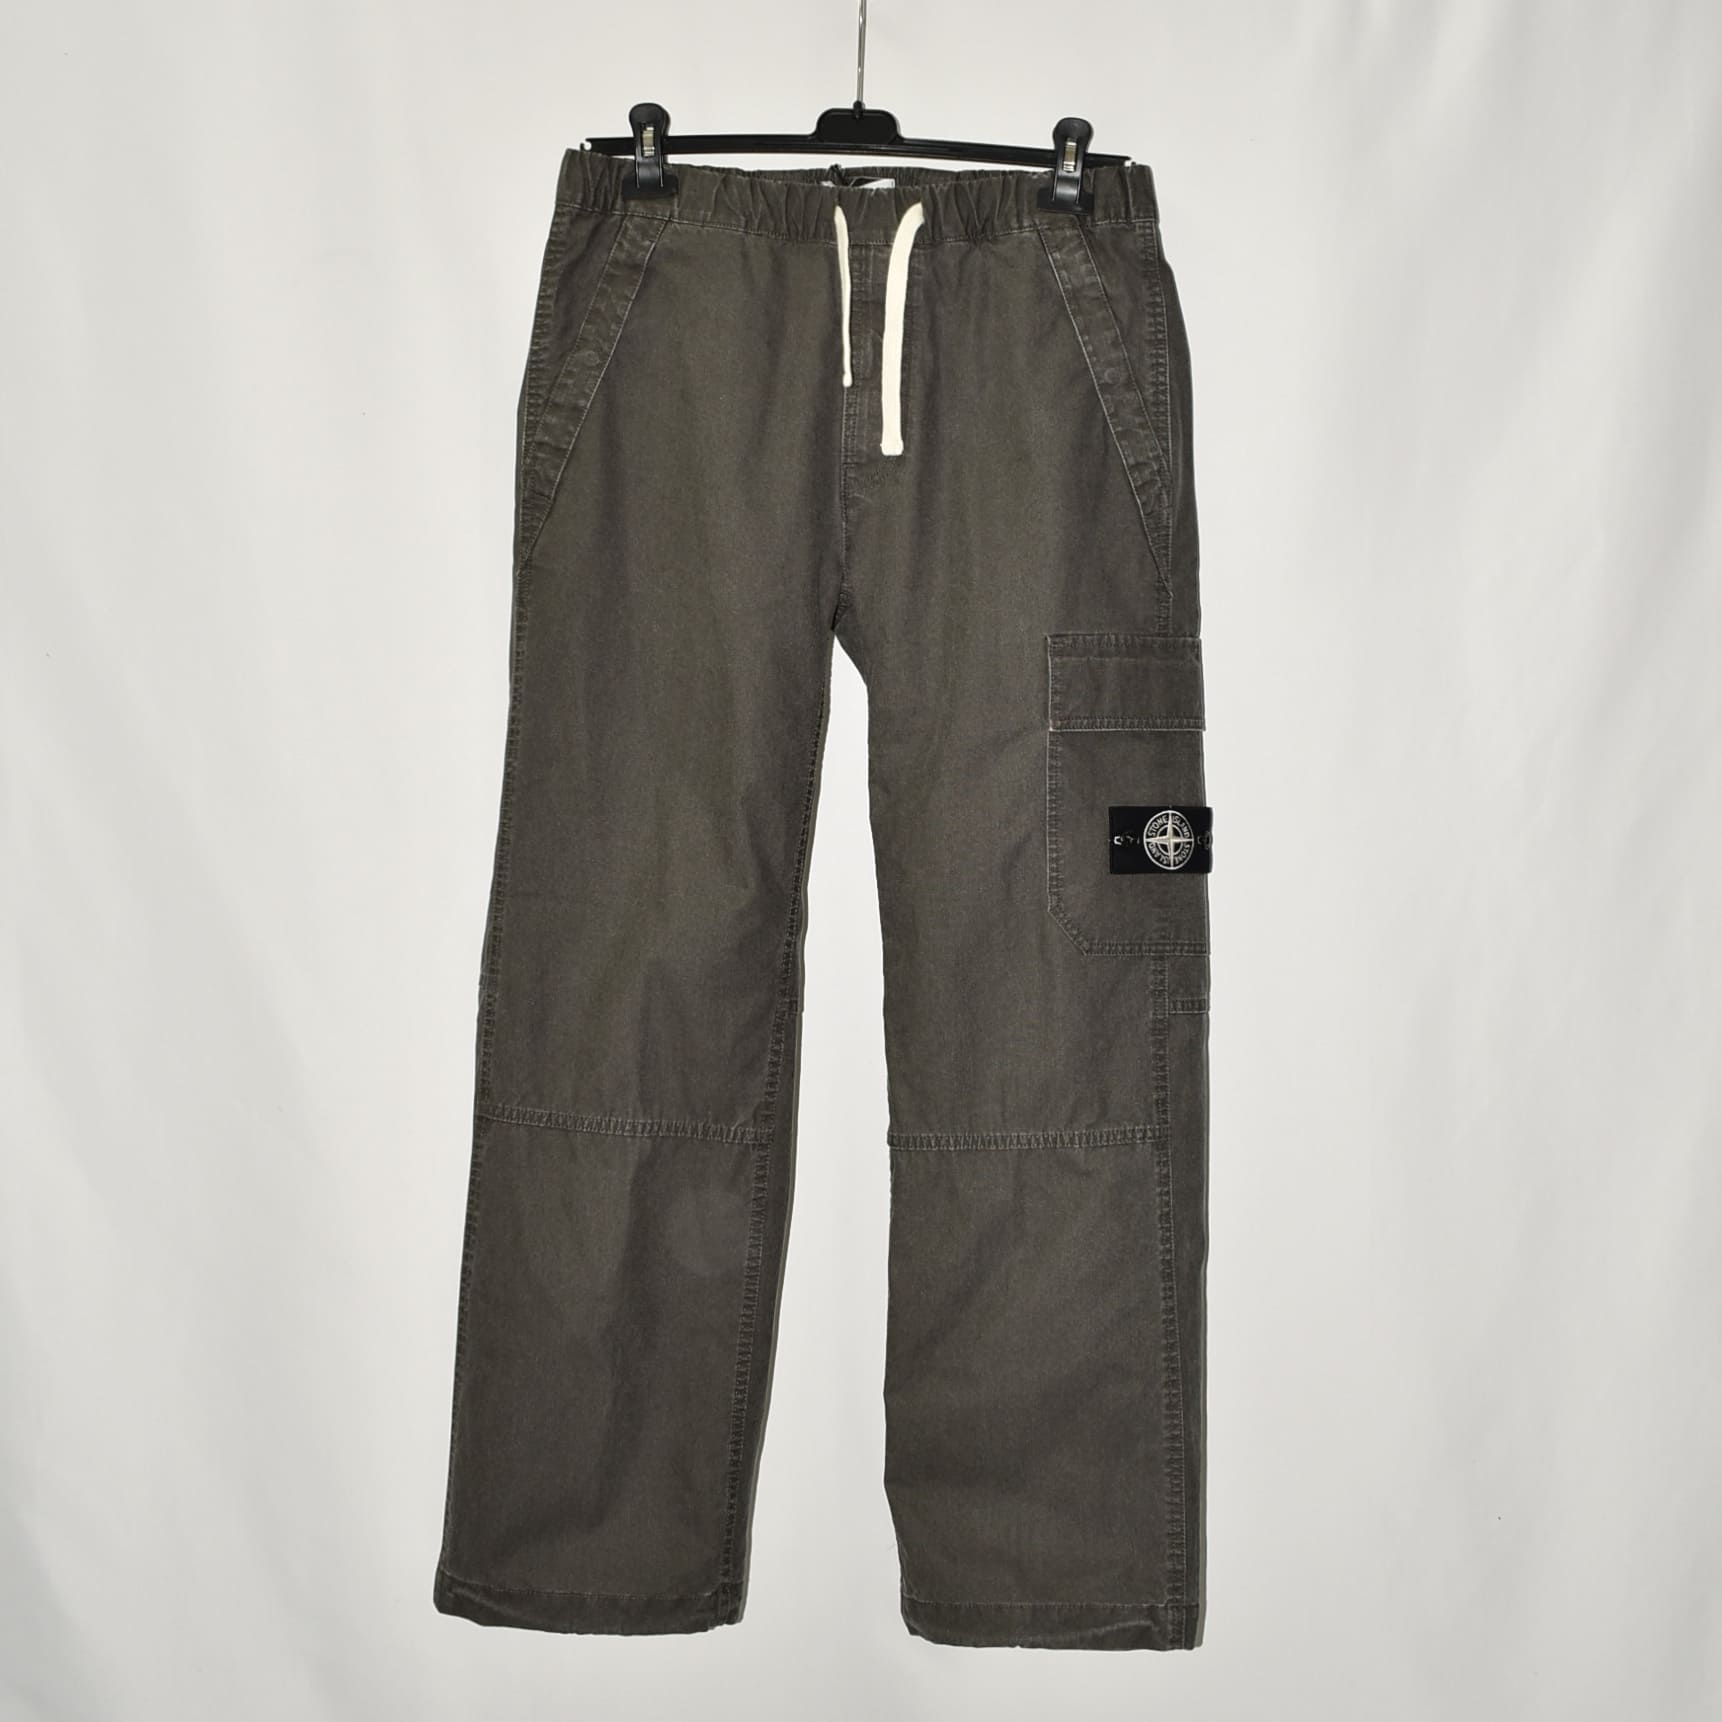 STONE ISLAND PANAMA RECYCLED OXIDE:STONE ISLAND CLOSED LOOP PROJECT PANTS[8115332T1]